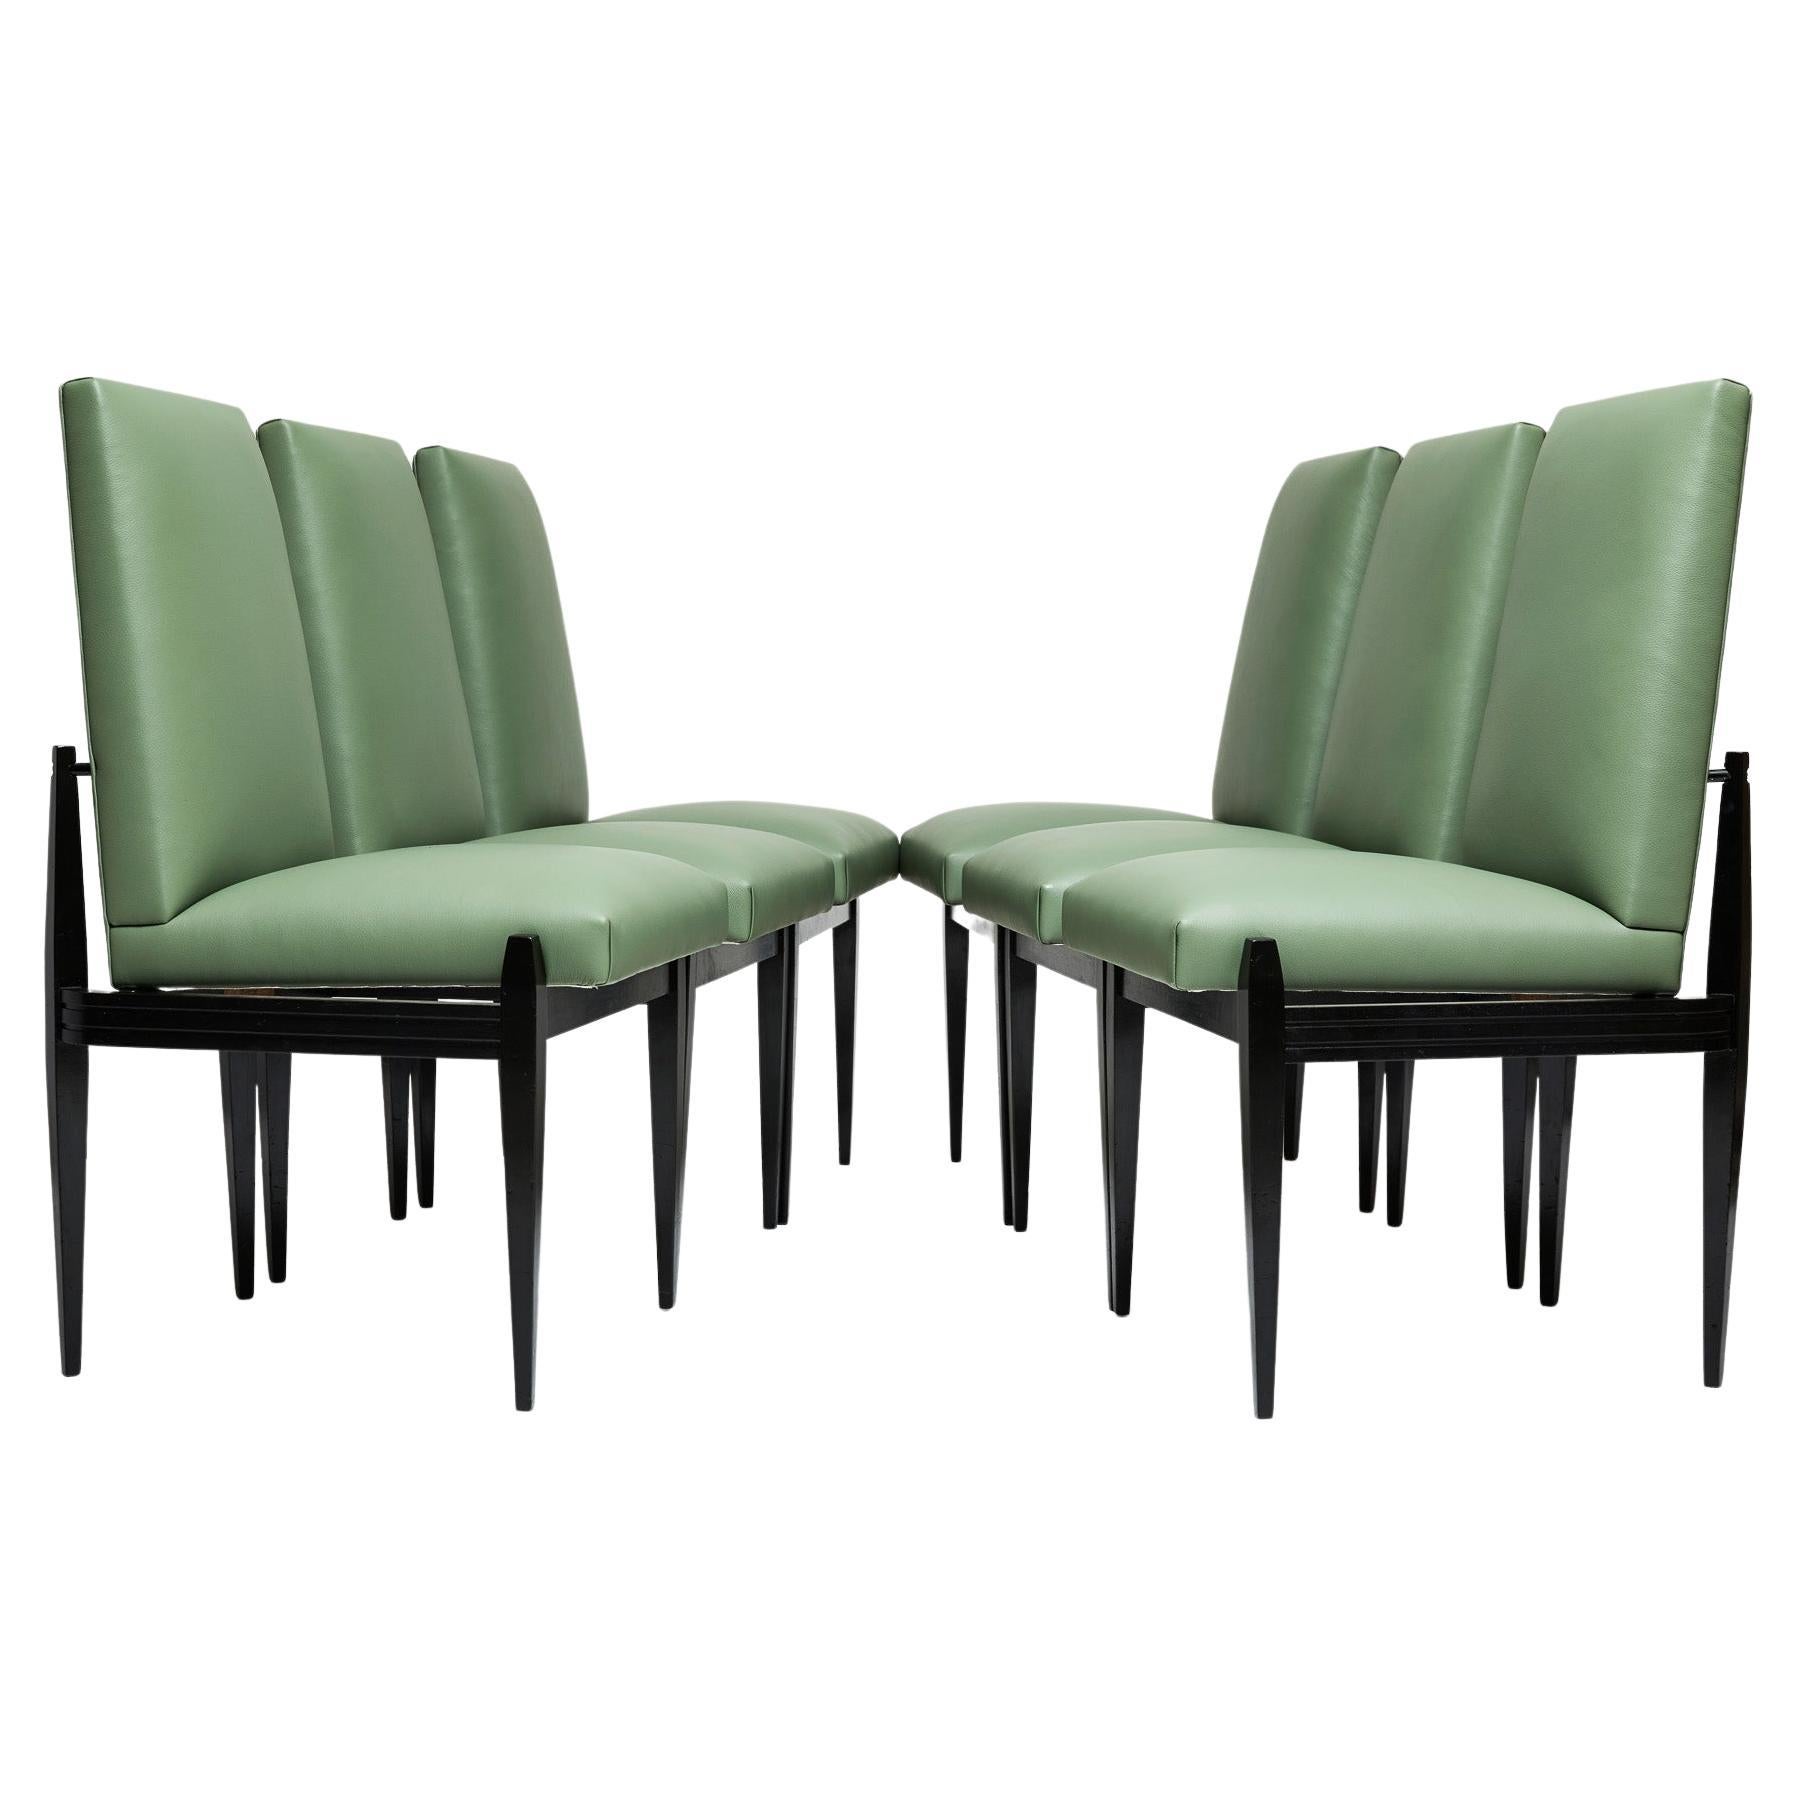 Mid-Century Modern Brazilian Modern Set of Six Chairs in Hardwood & Green Leather by Cimo 1950